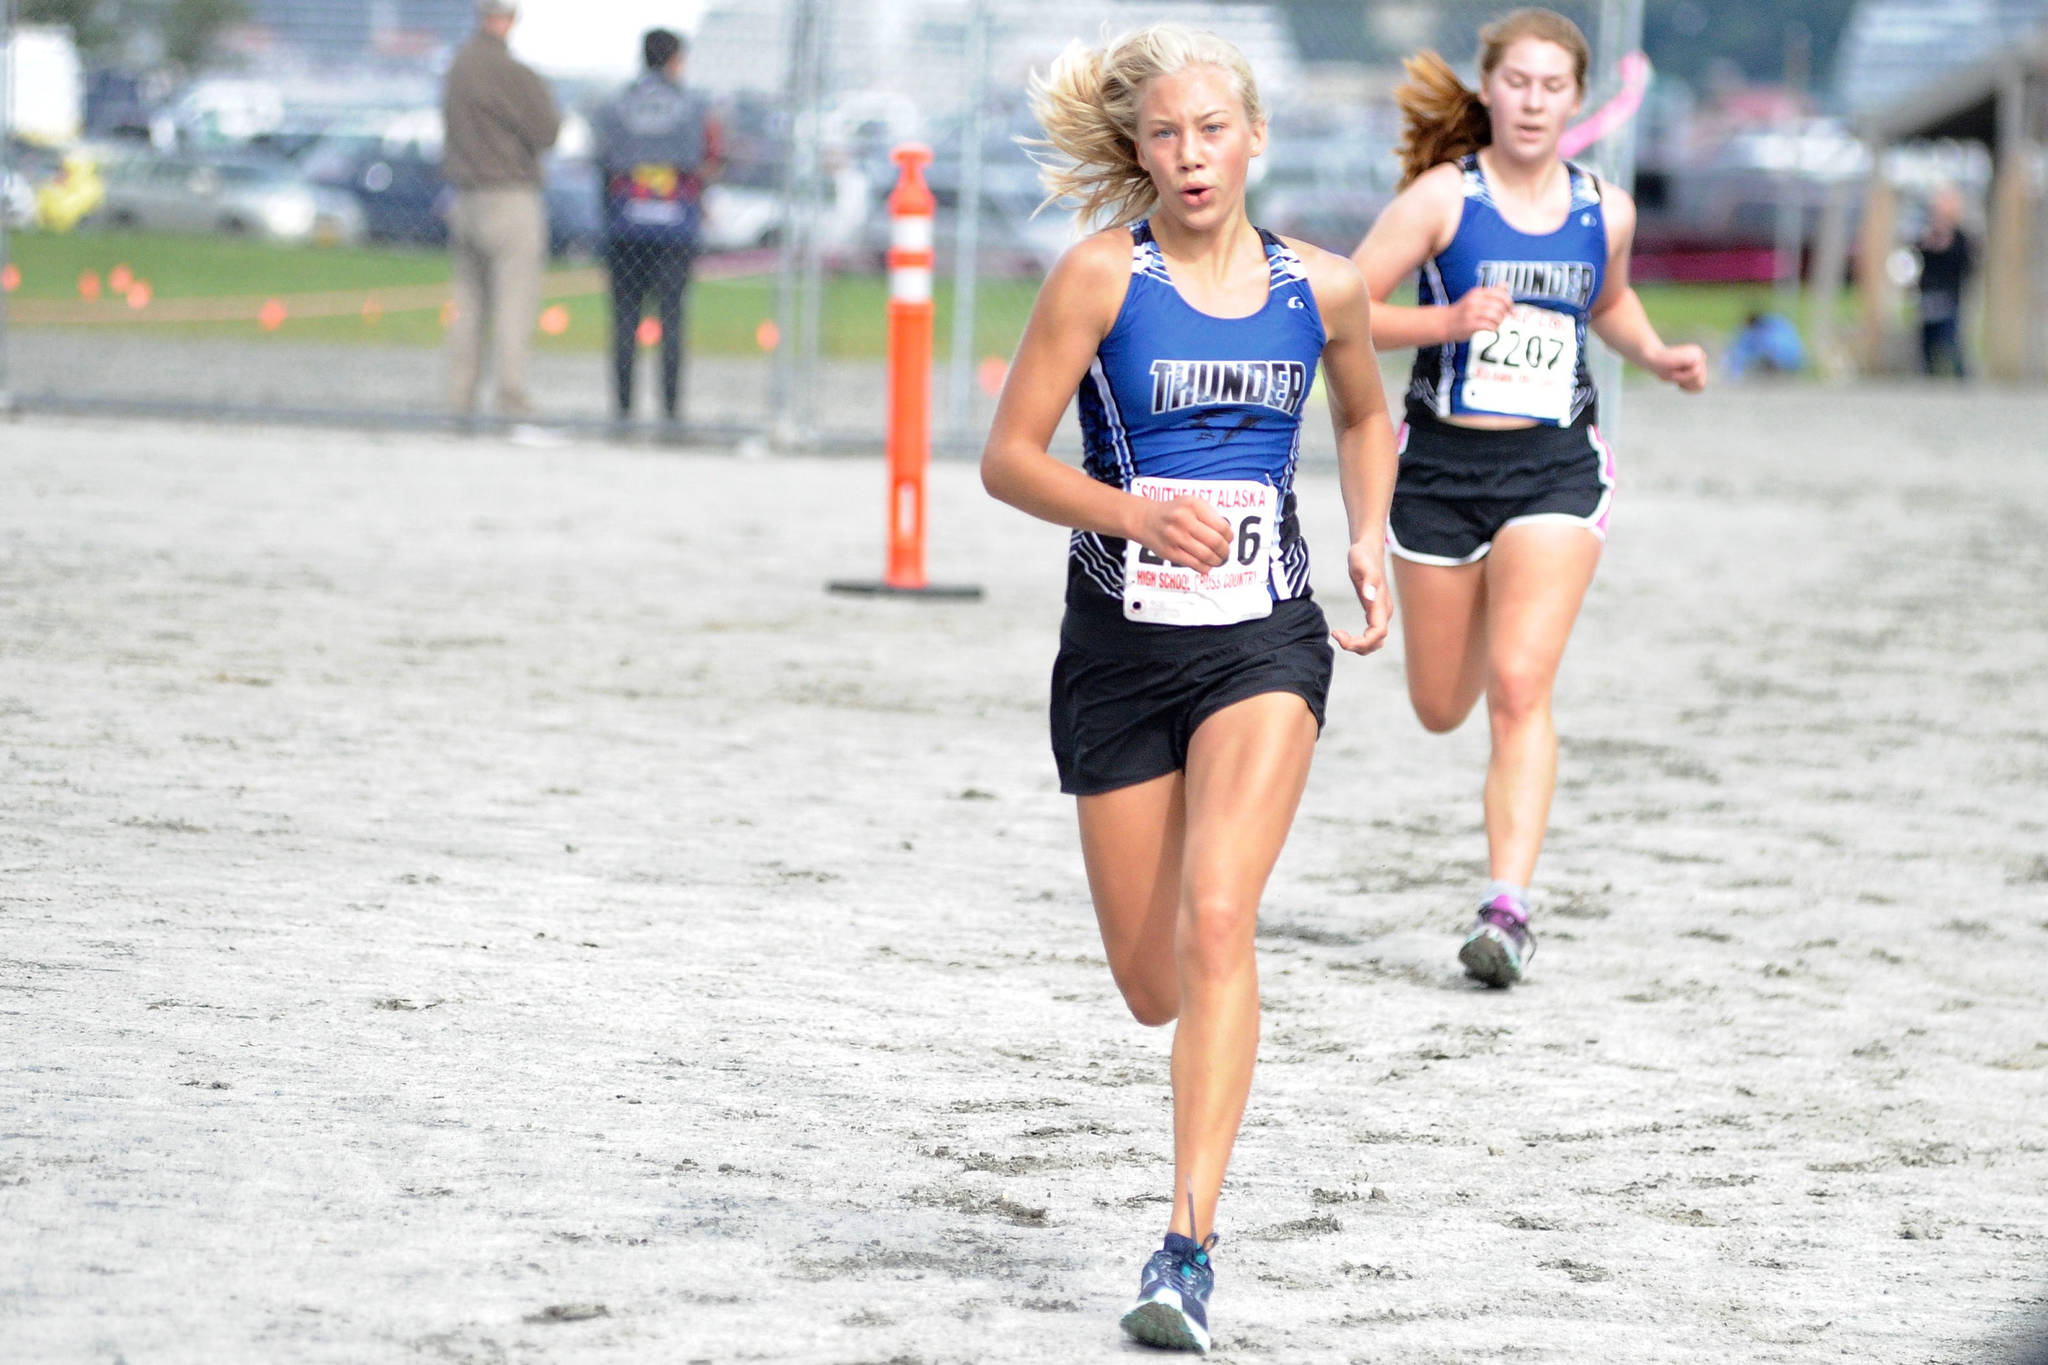 Thunder Mountain’s Hannah Deer, front, leads Sally Thompson to the finish line during the Douglas Island Mini-Meet at Savikko Park on Saturday, August 18. Deer and Thompson will anchor the TMHS girls cross country running team this season under new head coach Sandi Pahlke. (Nolin Ainsworth | Juneau Empire)